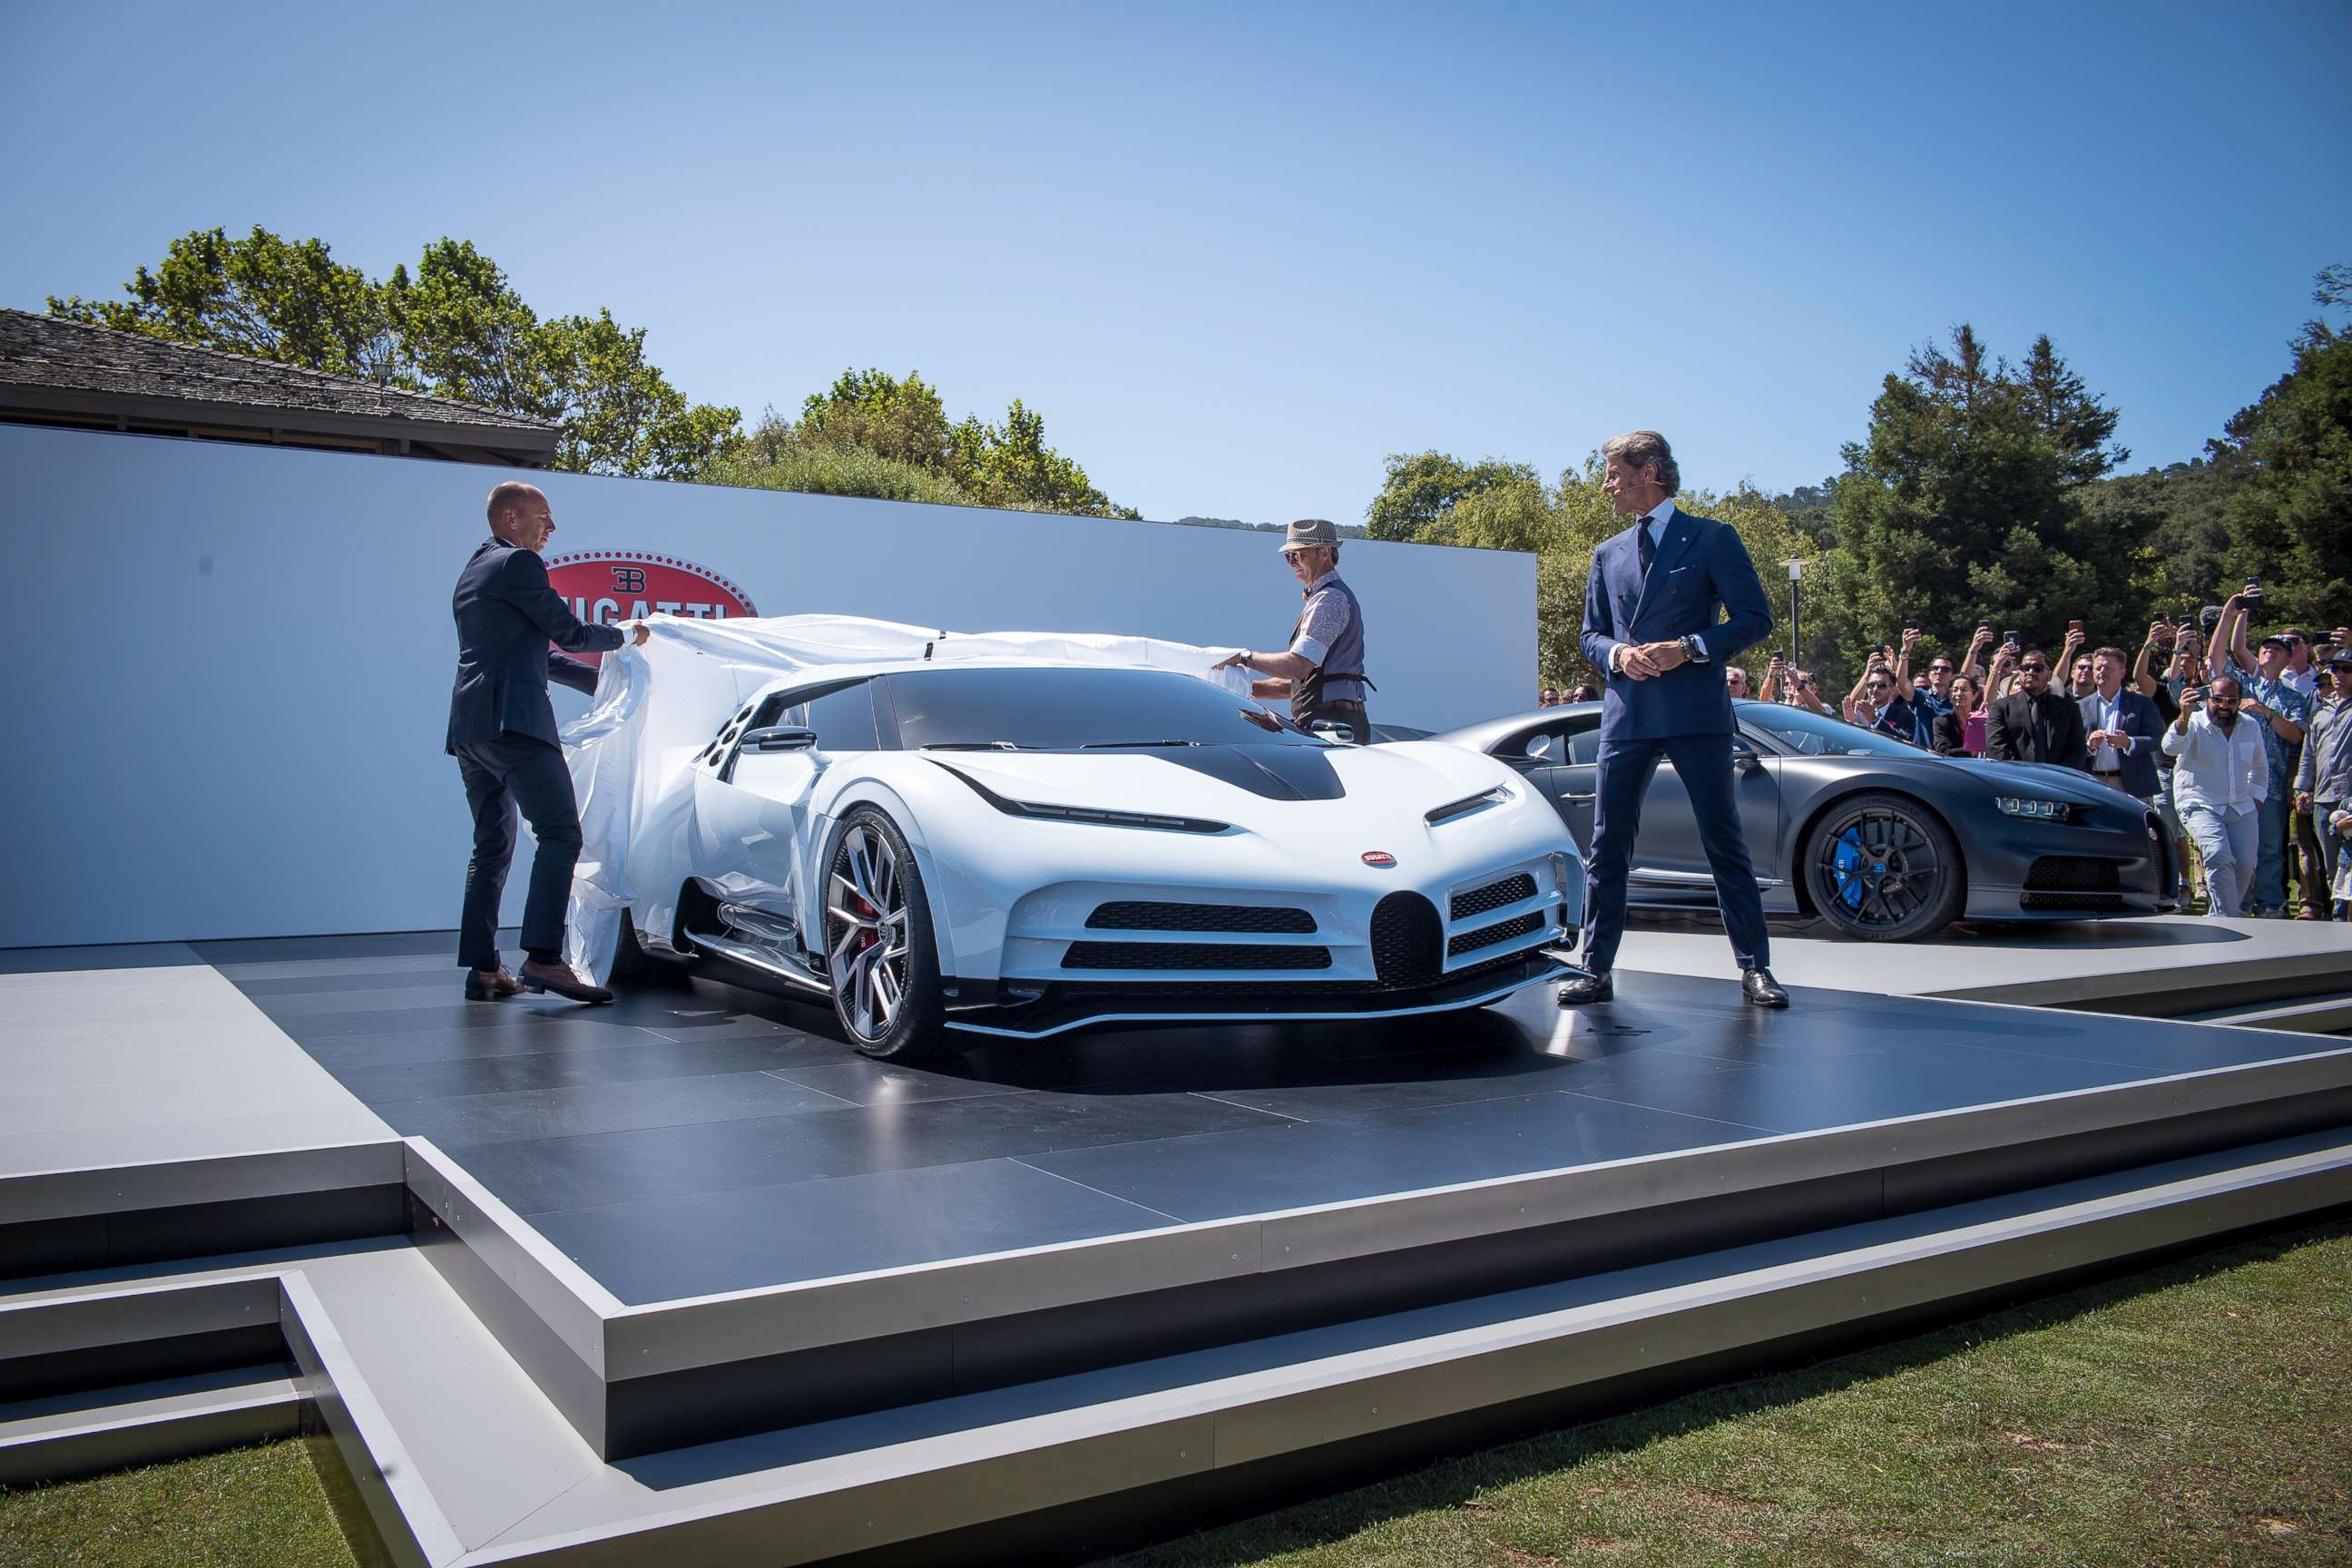 PHOTO: Stephan Winkelmann, president of Bugatti Automobiles SAS, right, watches the unveiling of the company's limited-edition Centodieci supercar in Carmel, Calif., Aug. 16, 2019.